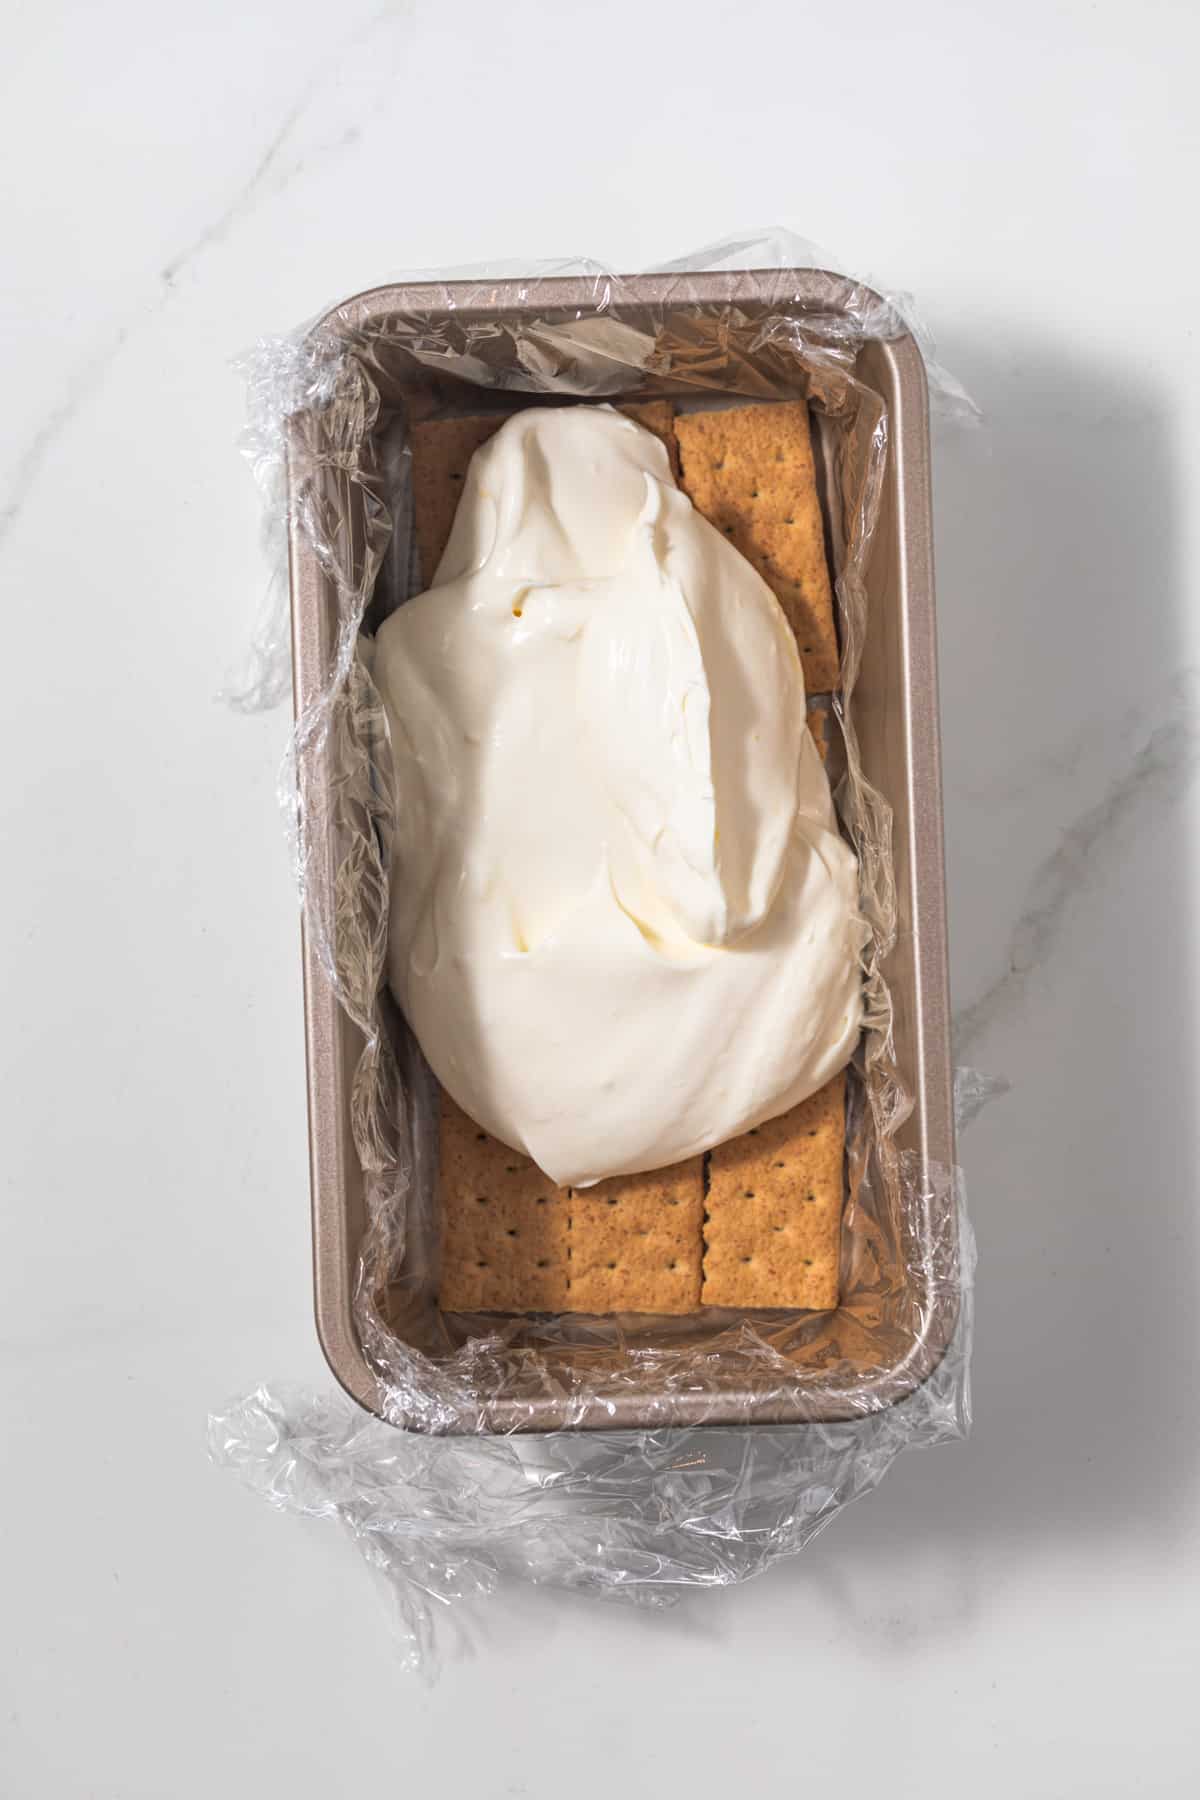 Lemon whipped cream layered over graham crackers in loaf pan.